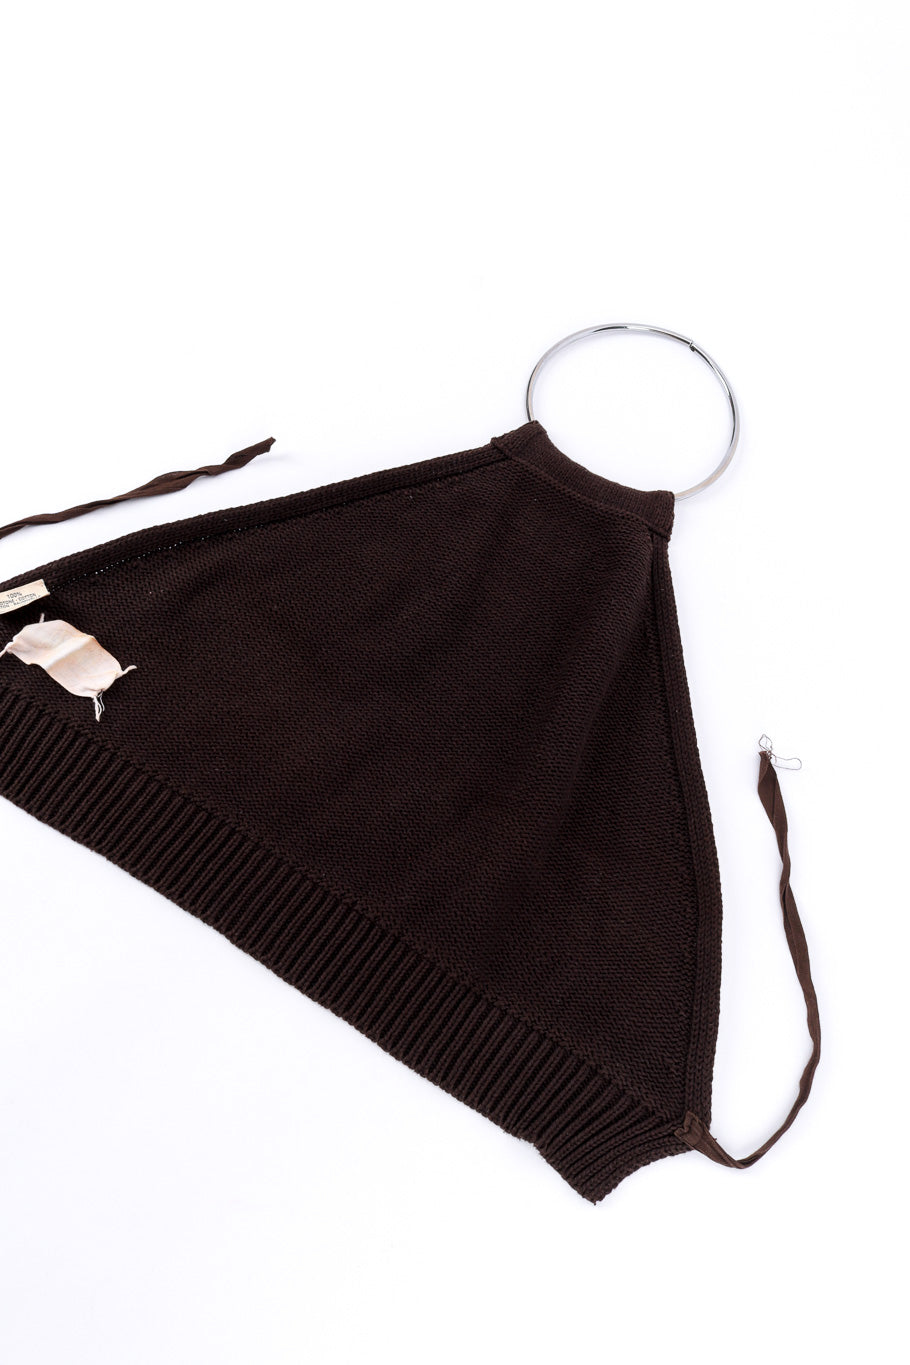 Knit halter top by Maison Margiela on white background inside out @recessla